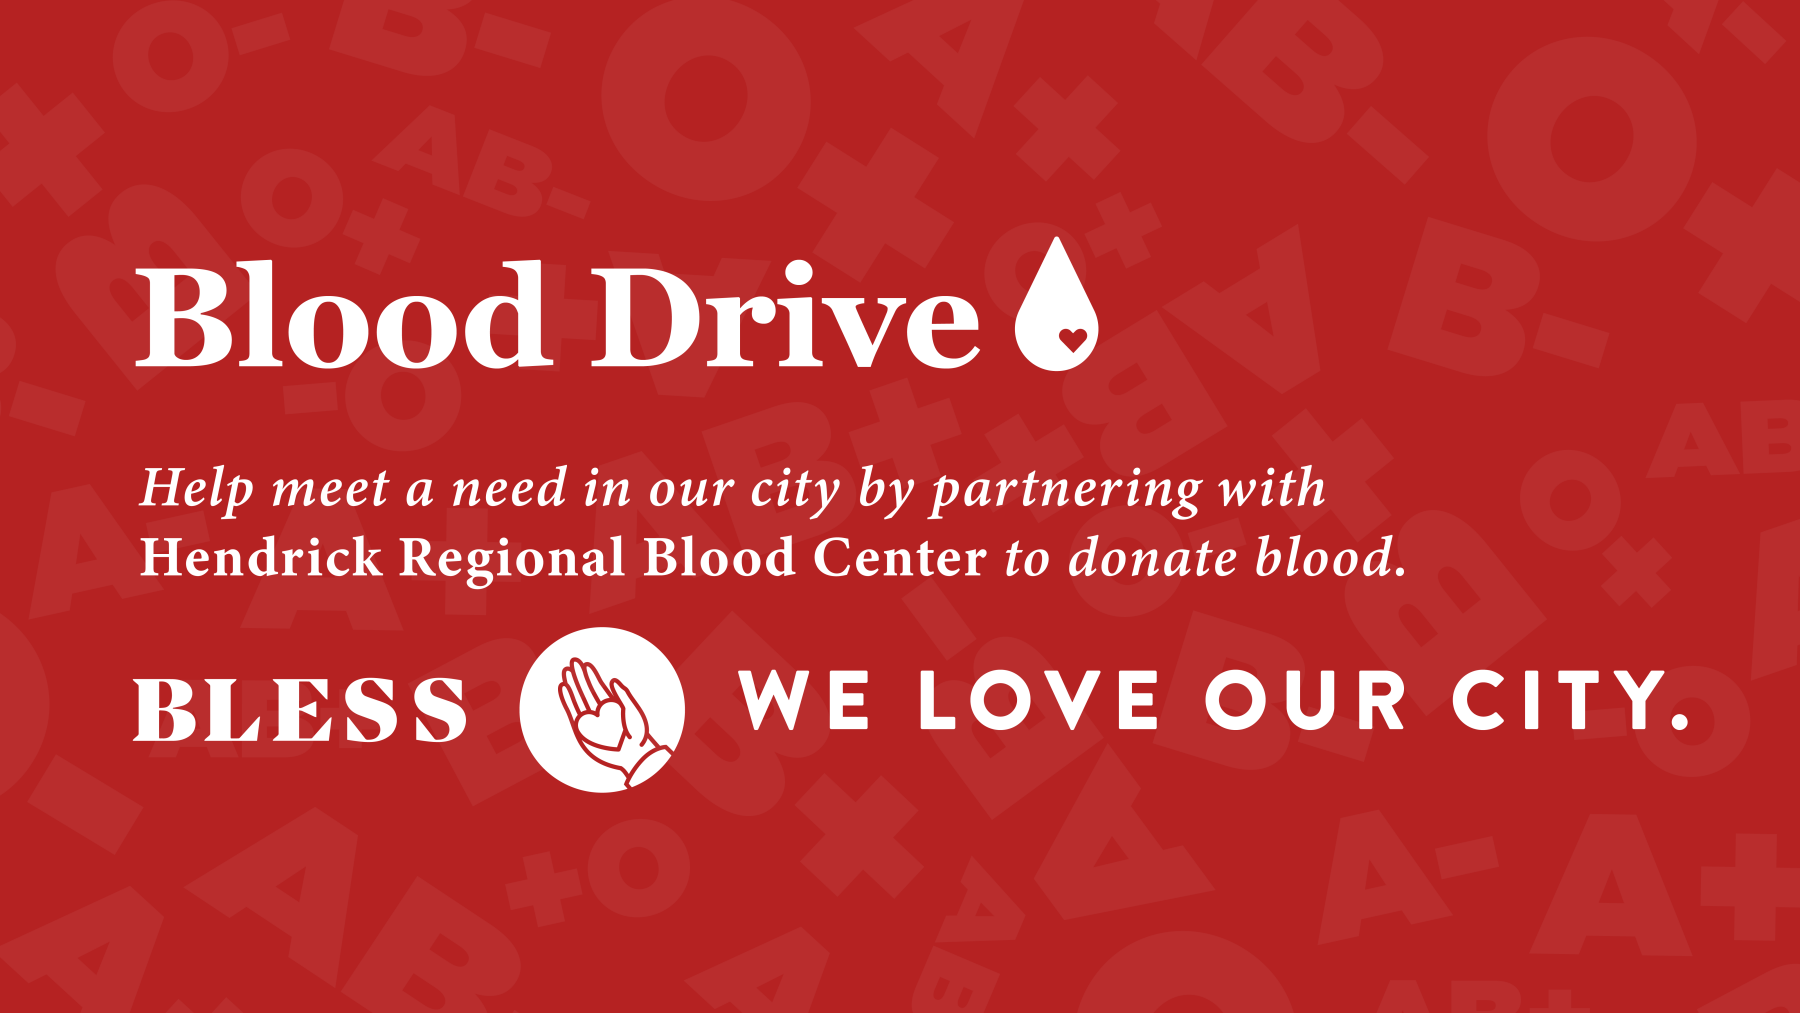 We Love Our City: Blood Drive 